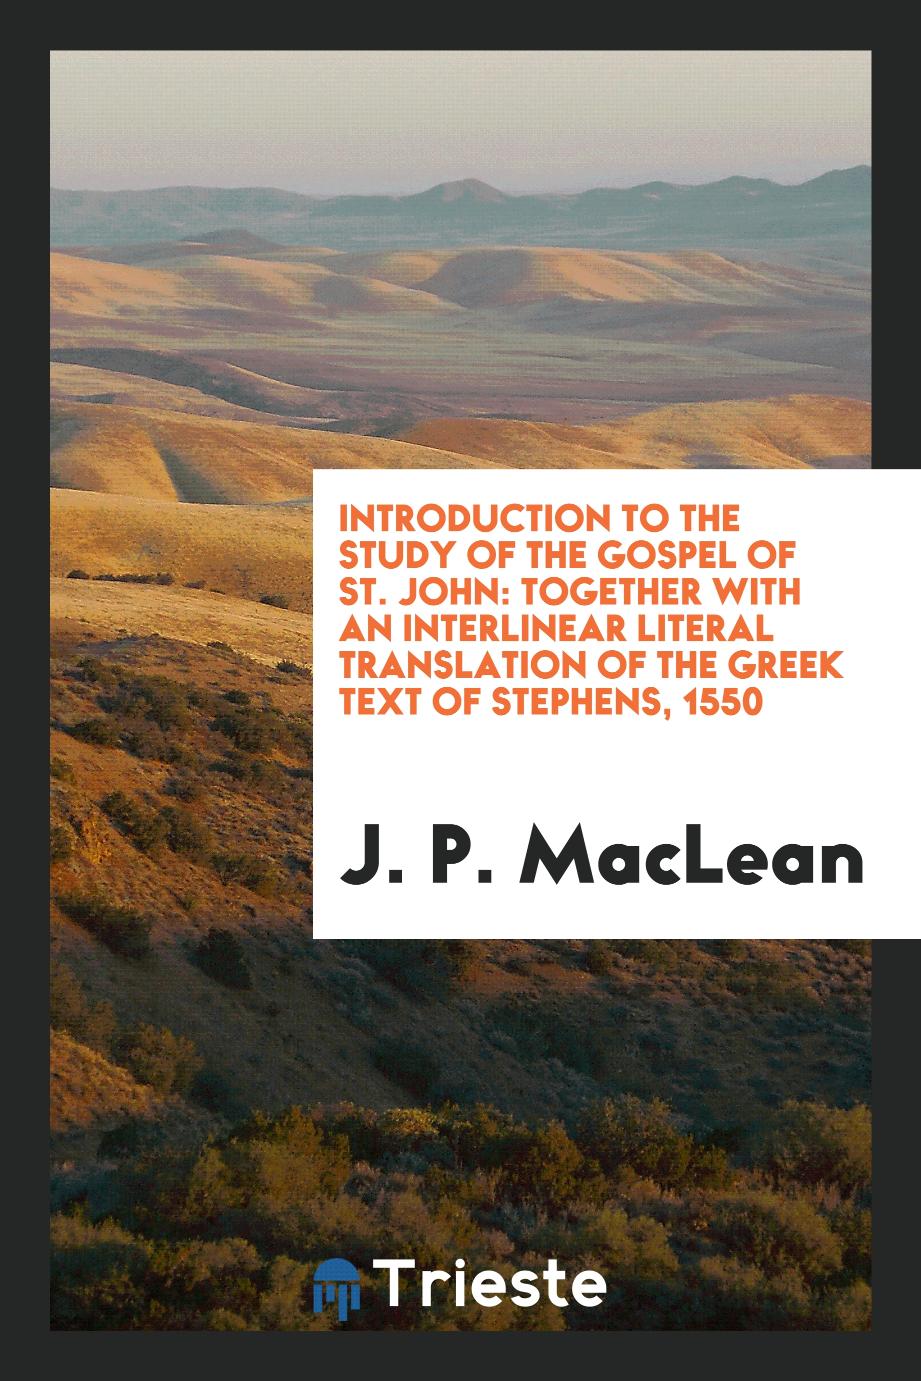 Introduction to the study of the Gospel of St. John: together with an interlinear literal translation of the Greek text of Stephens, 1550